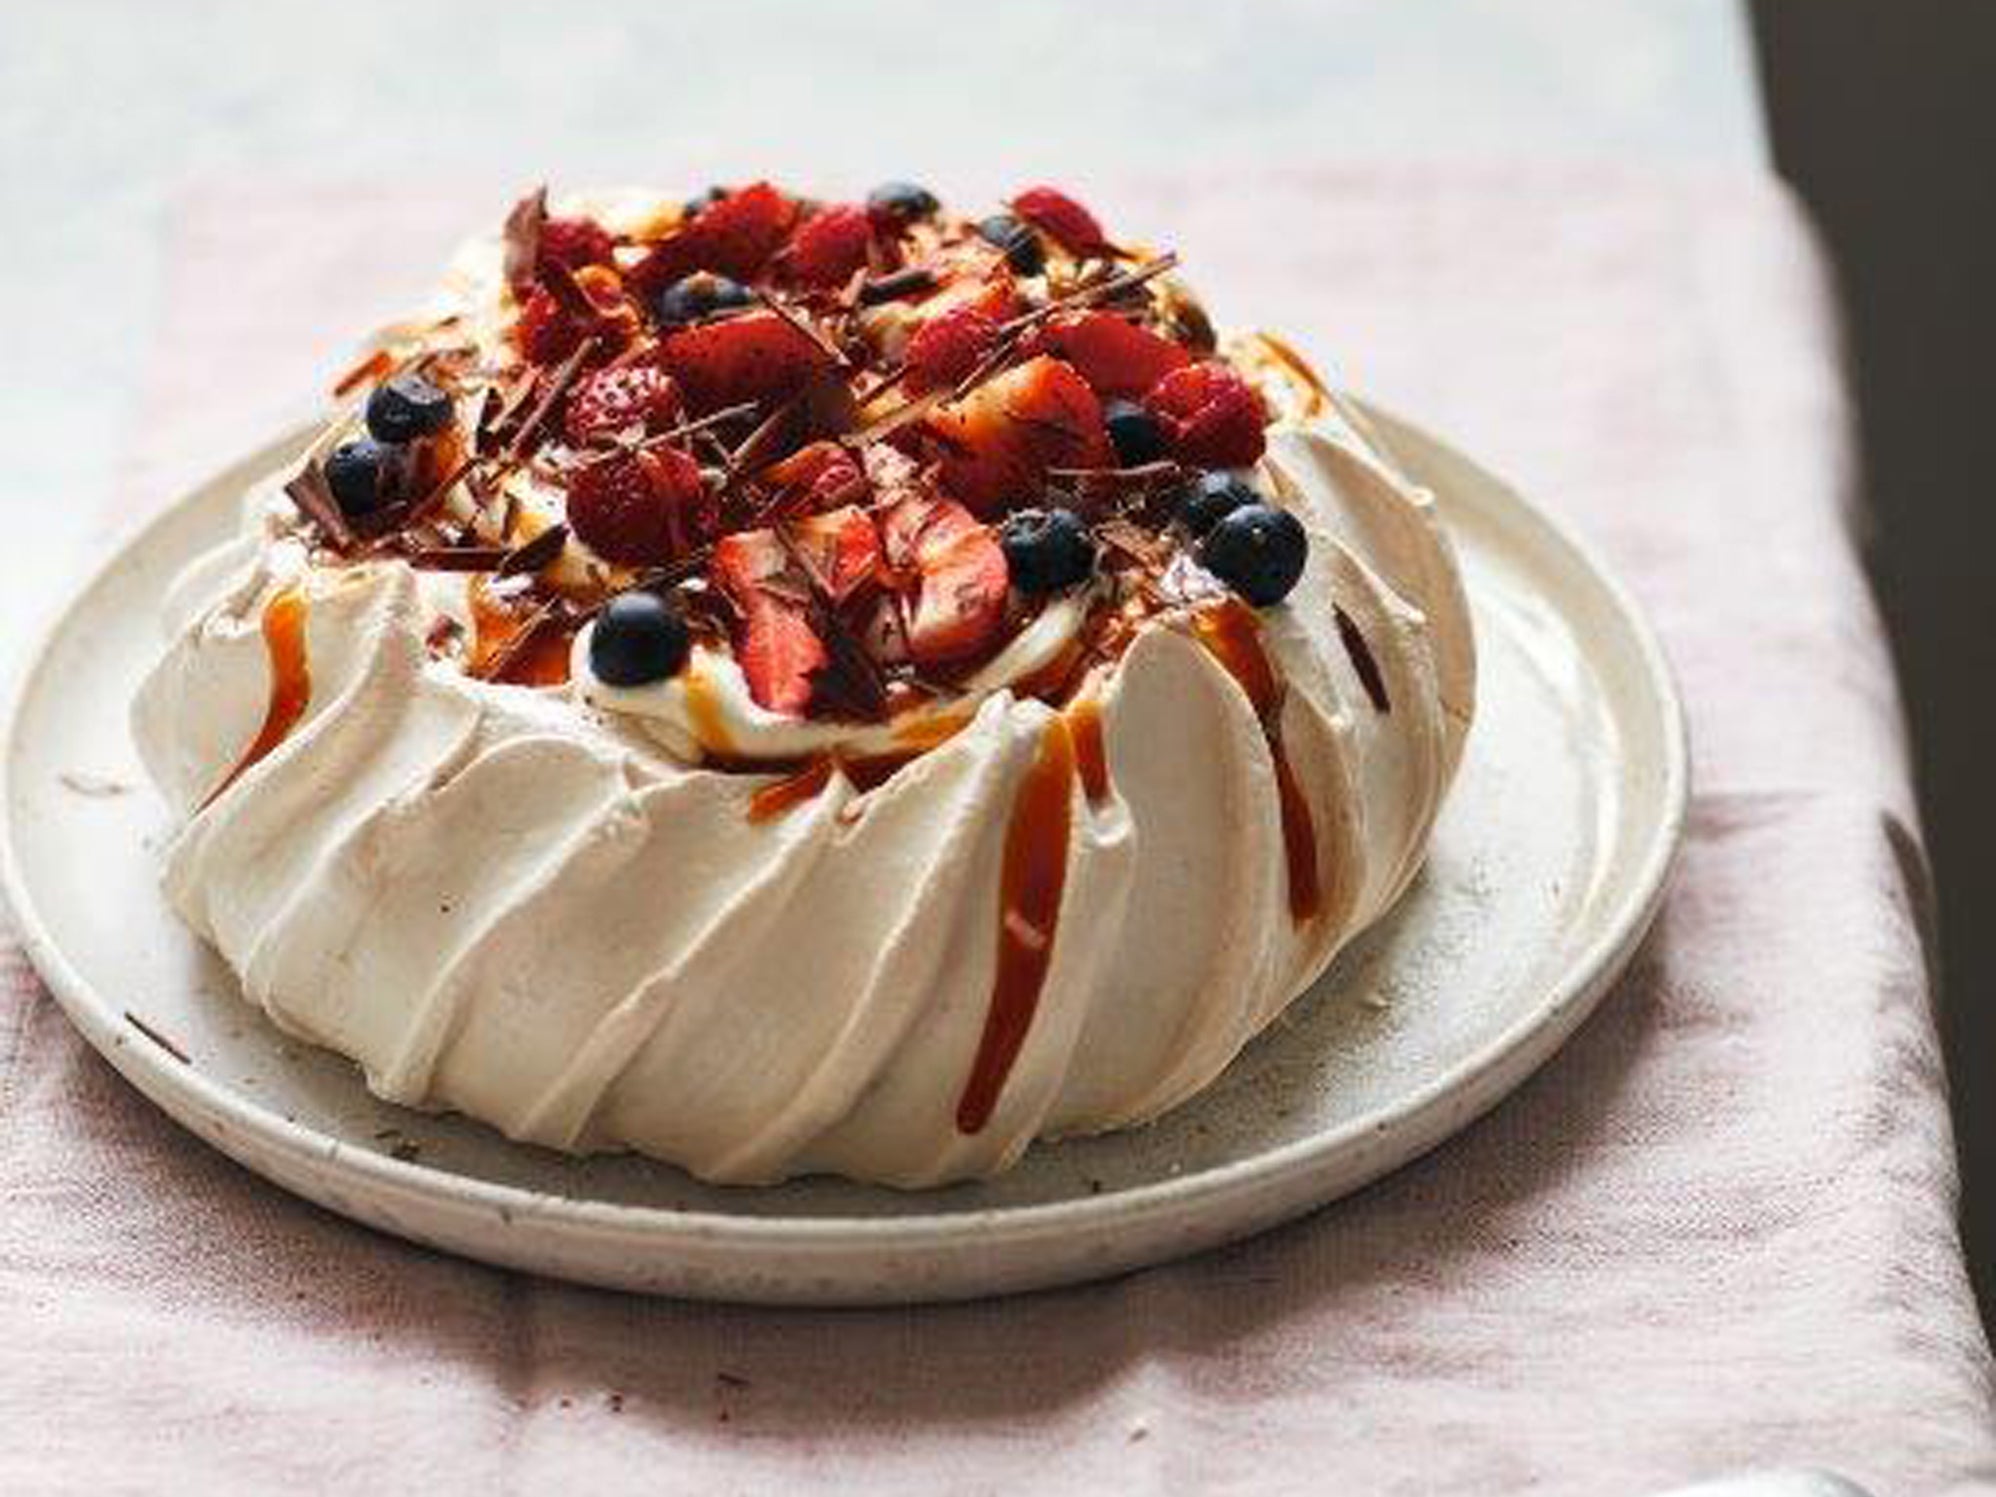 Sometimes pavlova can be tricky, but this one is easy